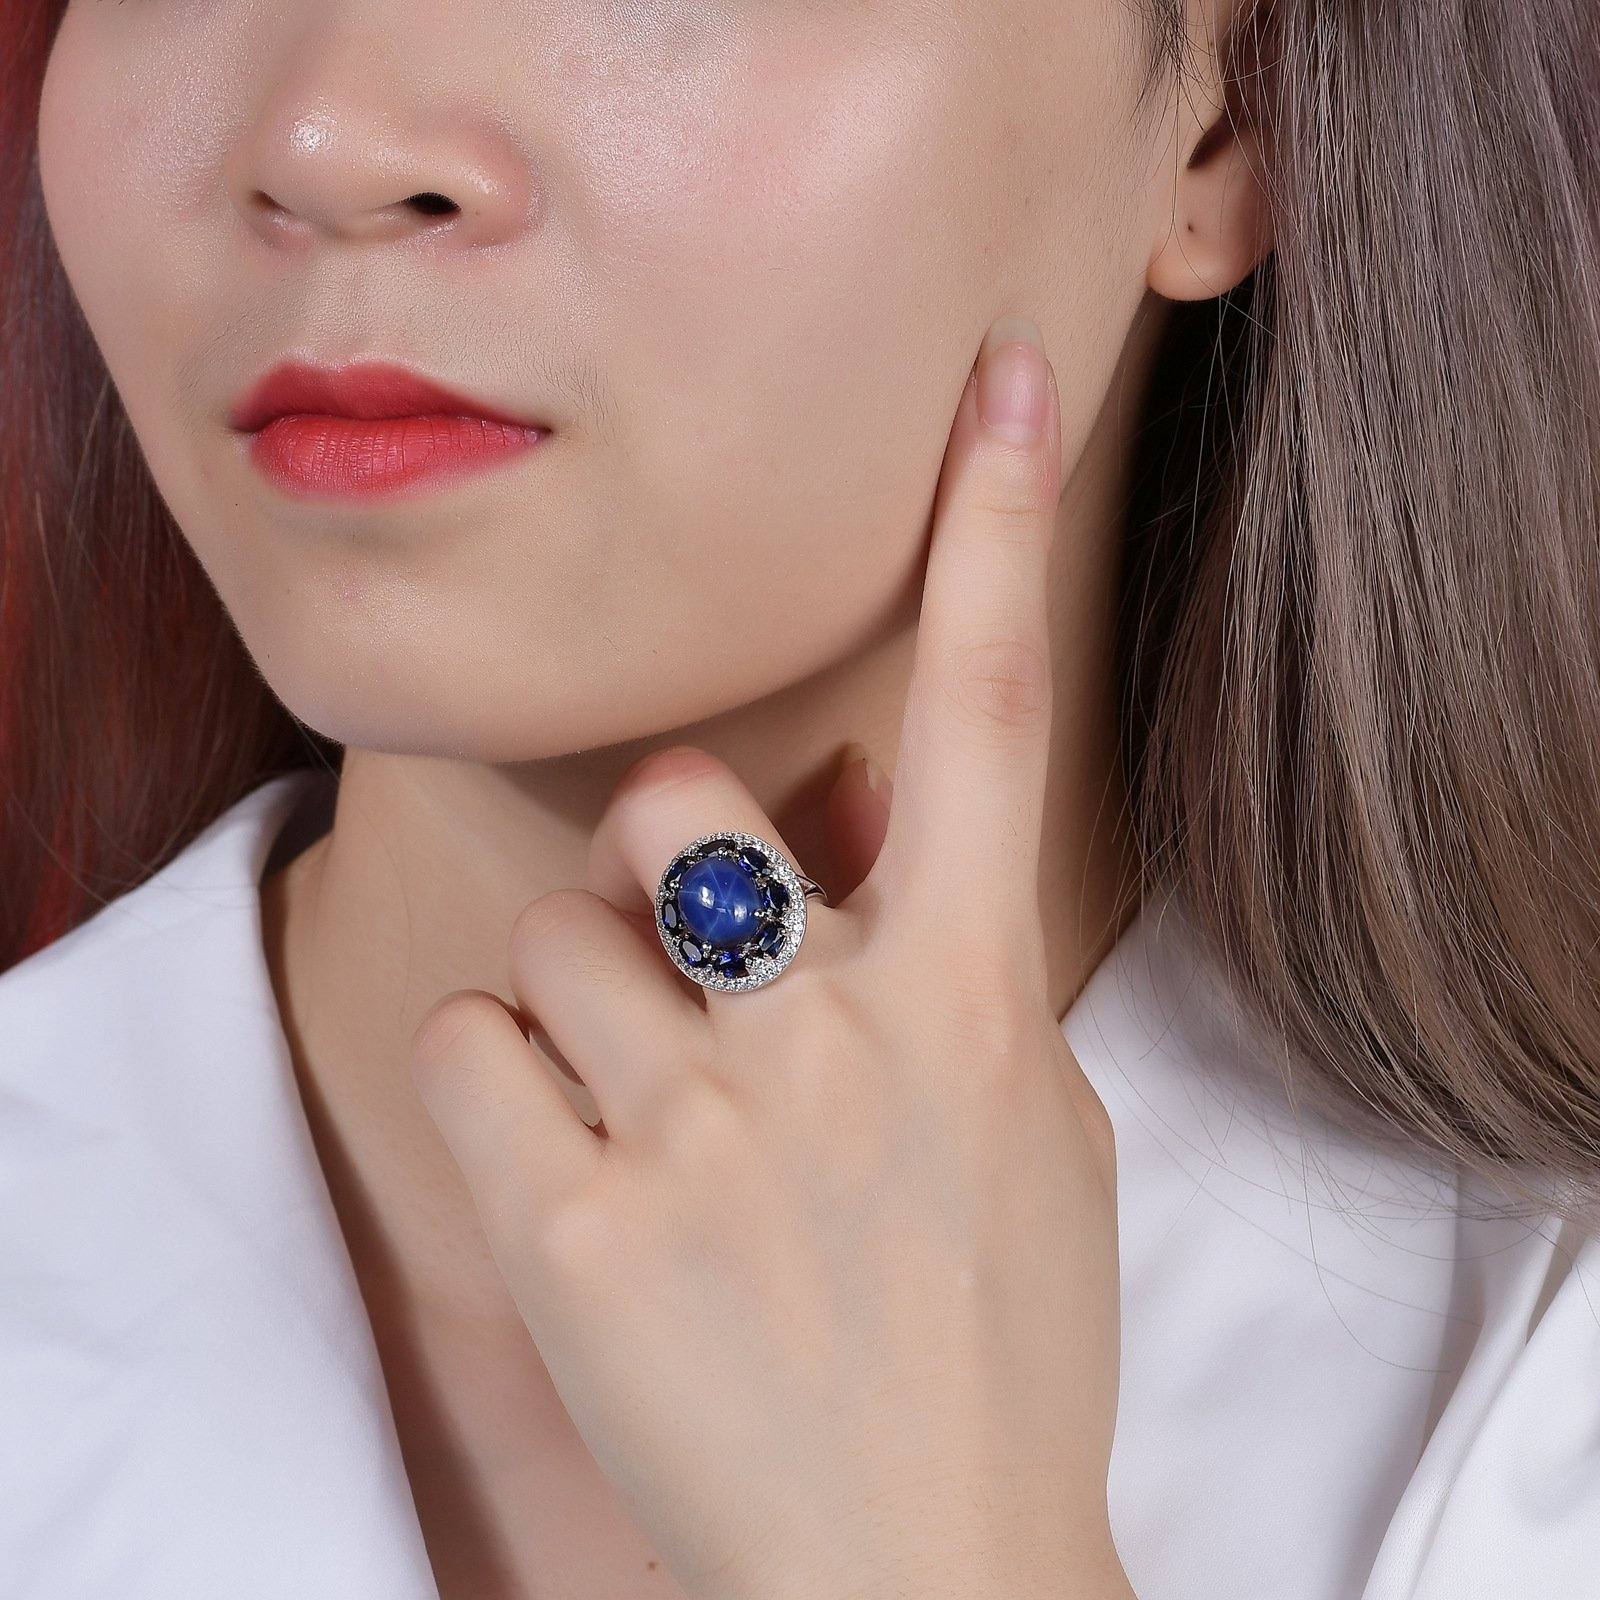 Vintage Star Sapphire Ring - HER'S